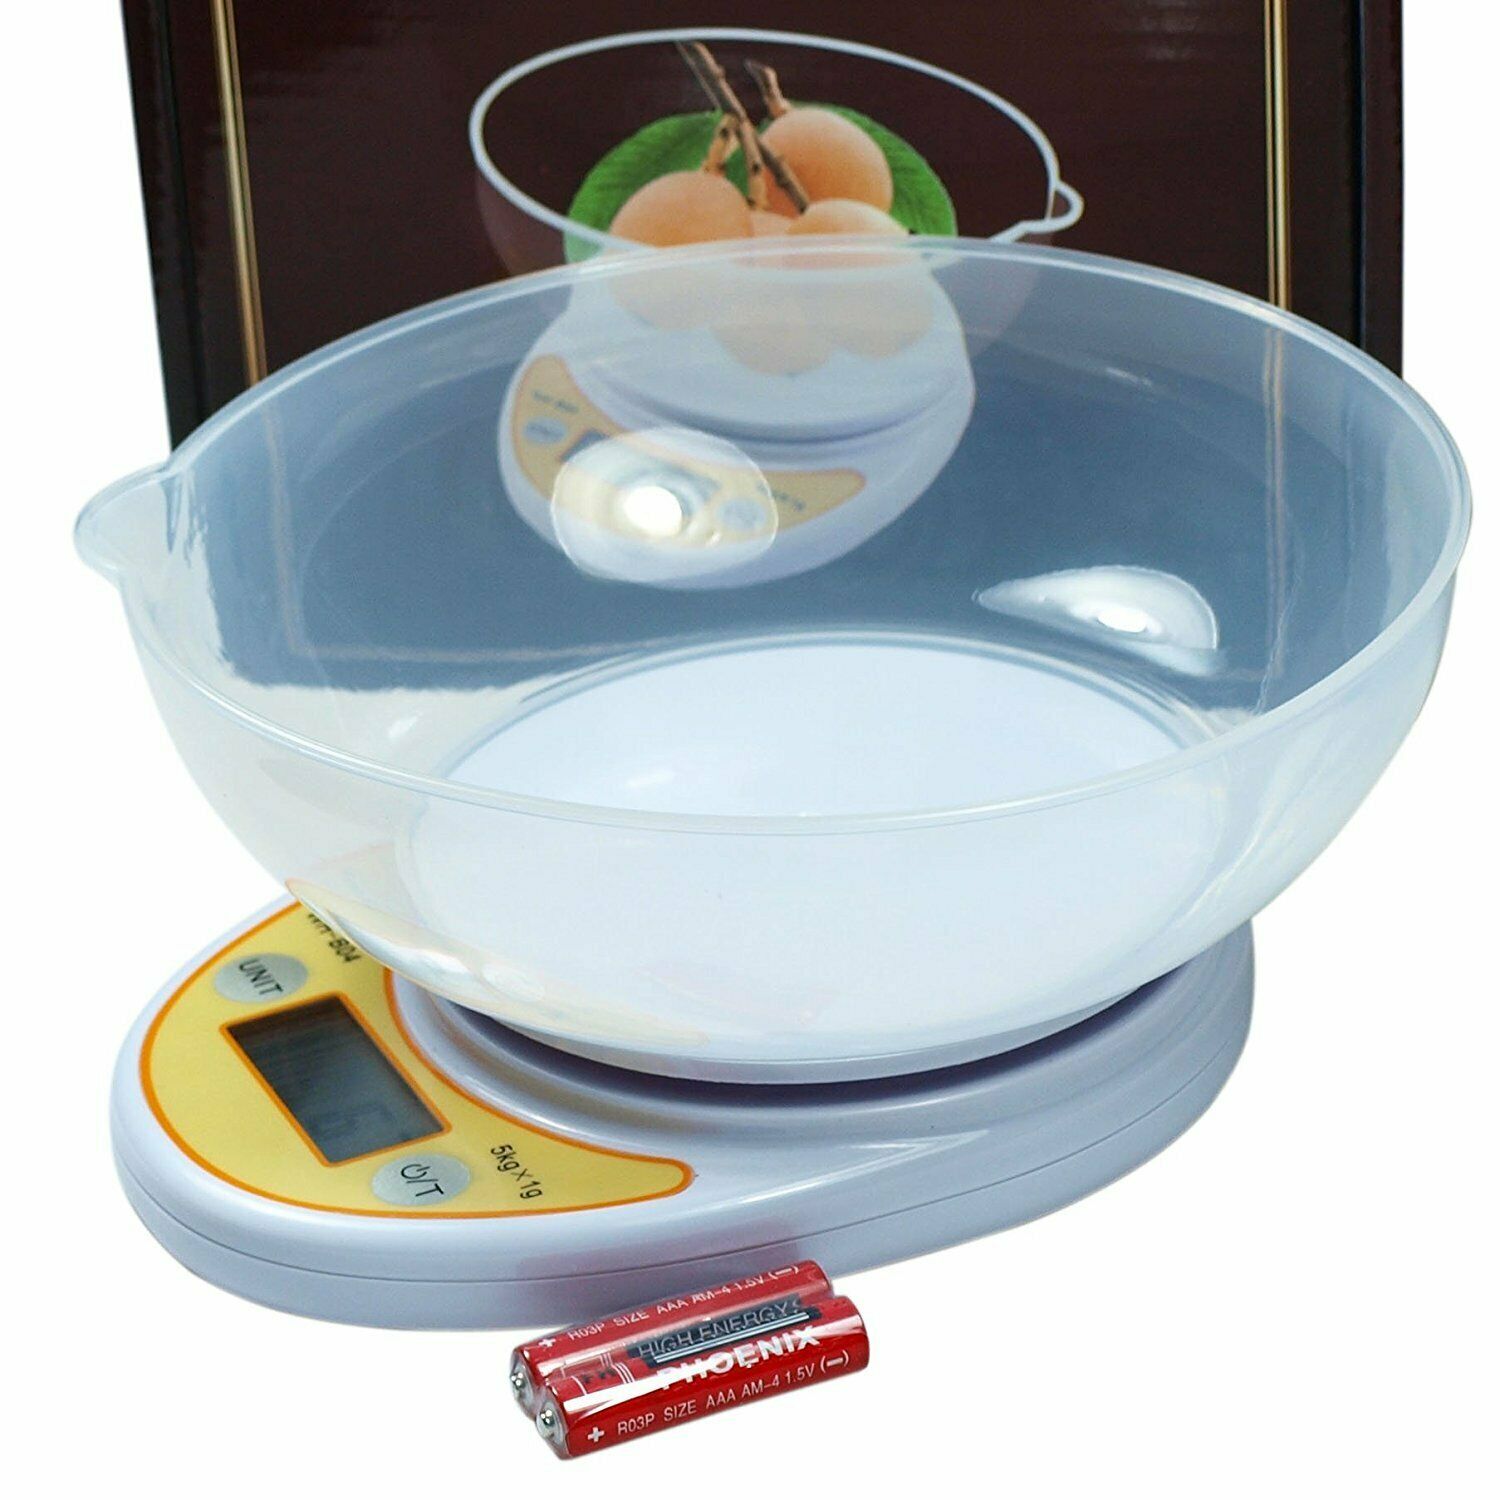 https://econosuperstore.com/wp-content/uploads/imported/3/Multi-Function-Digital-Kitchen-Scale-w-Weighing-Bowl-for-Food-Kitchen-11lb-5kg-312519845873.JPG